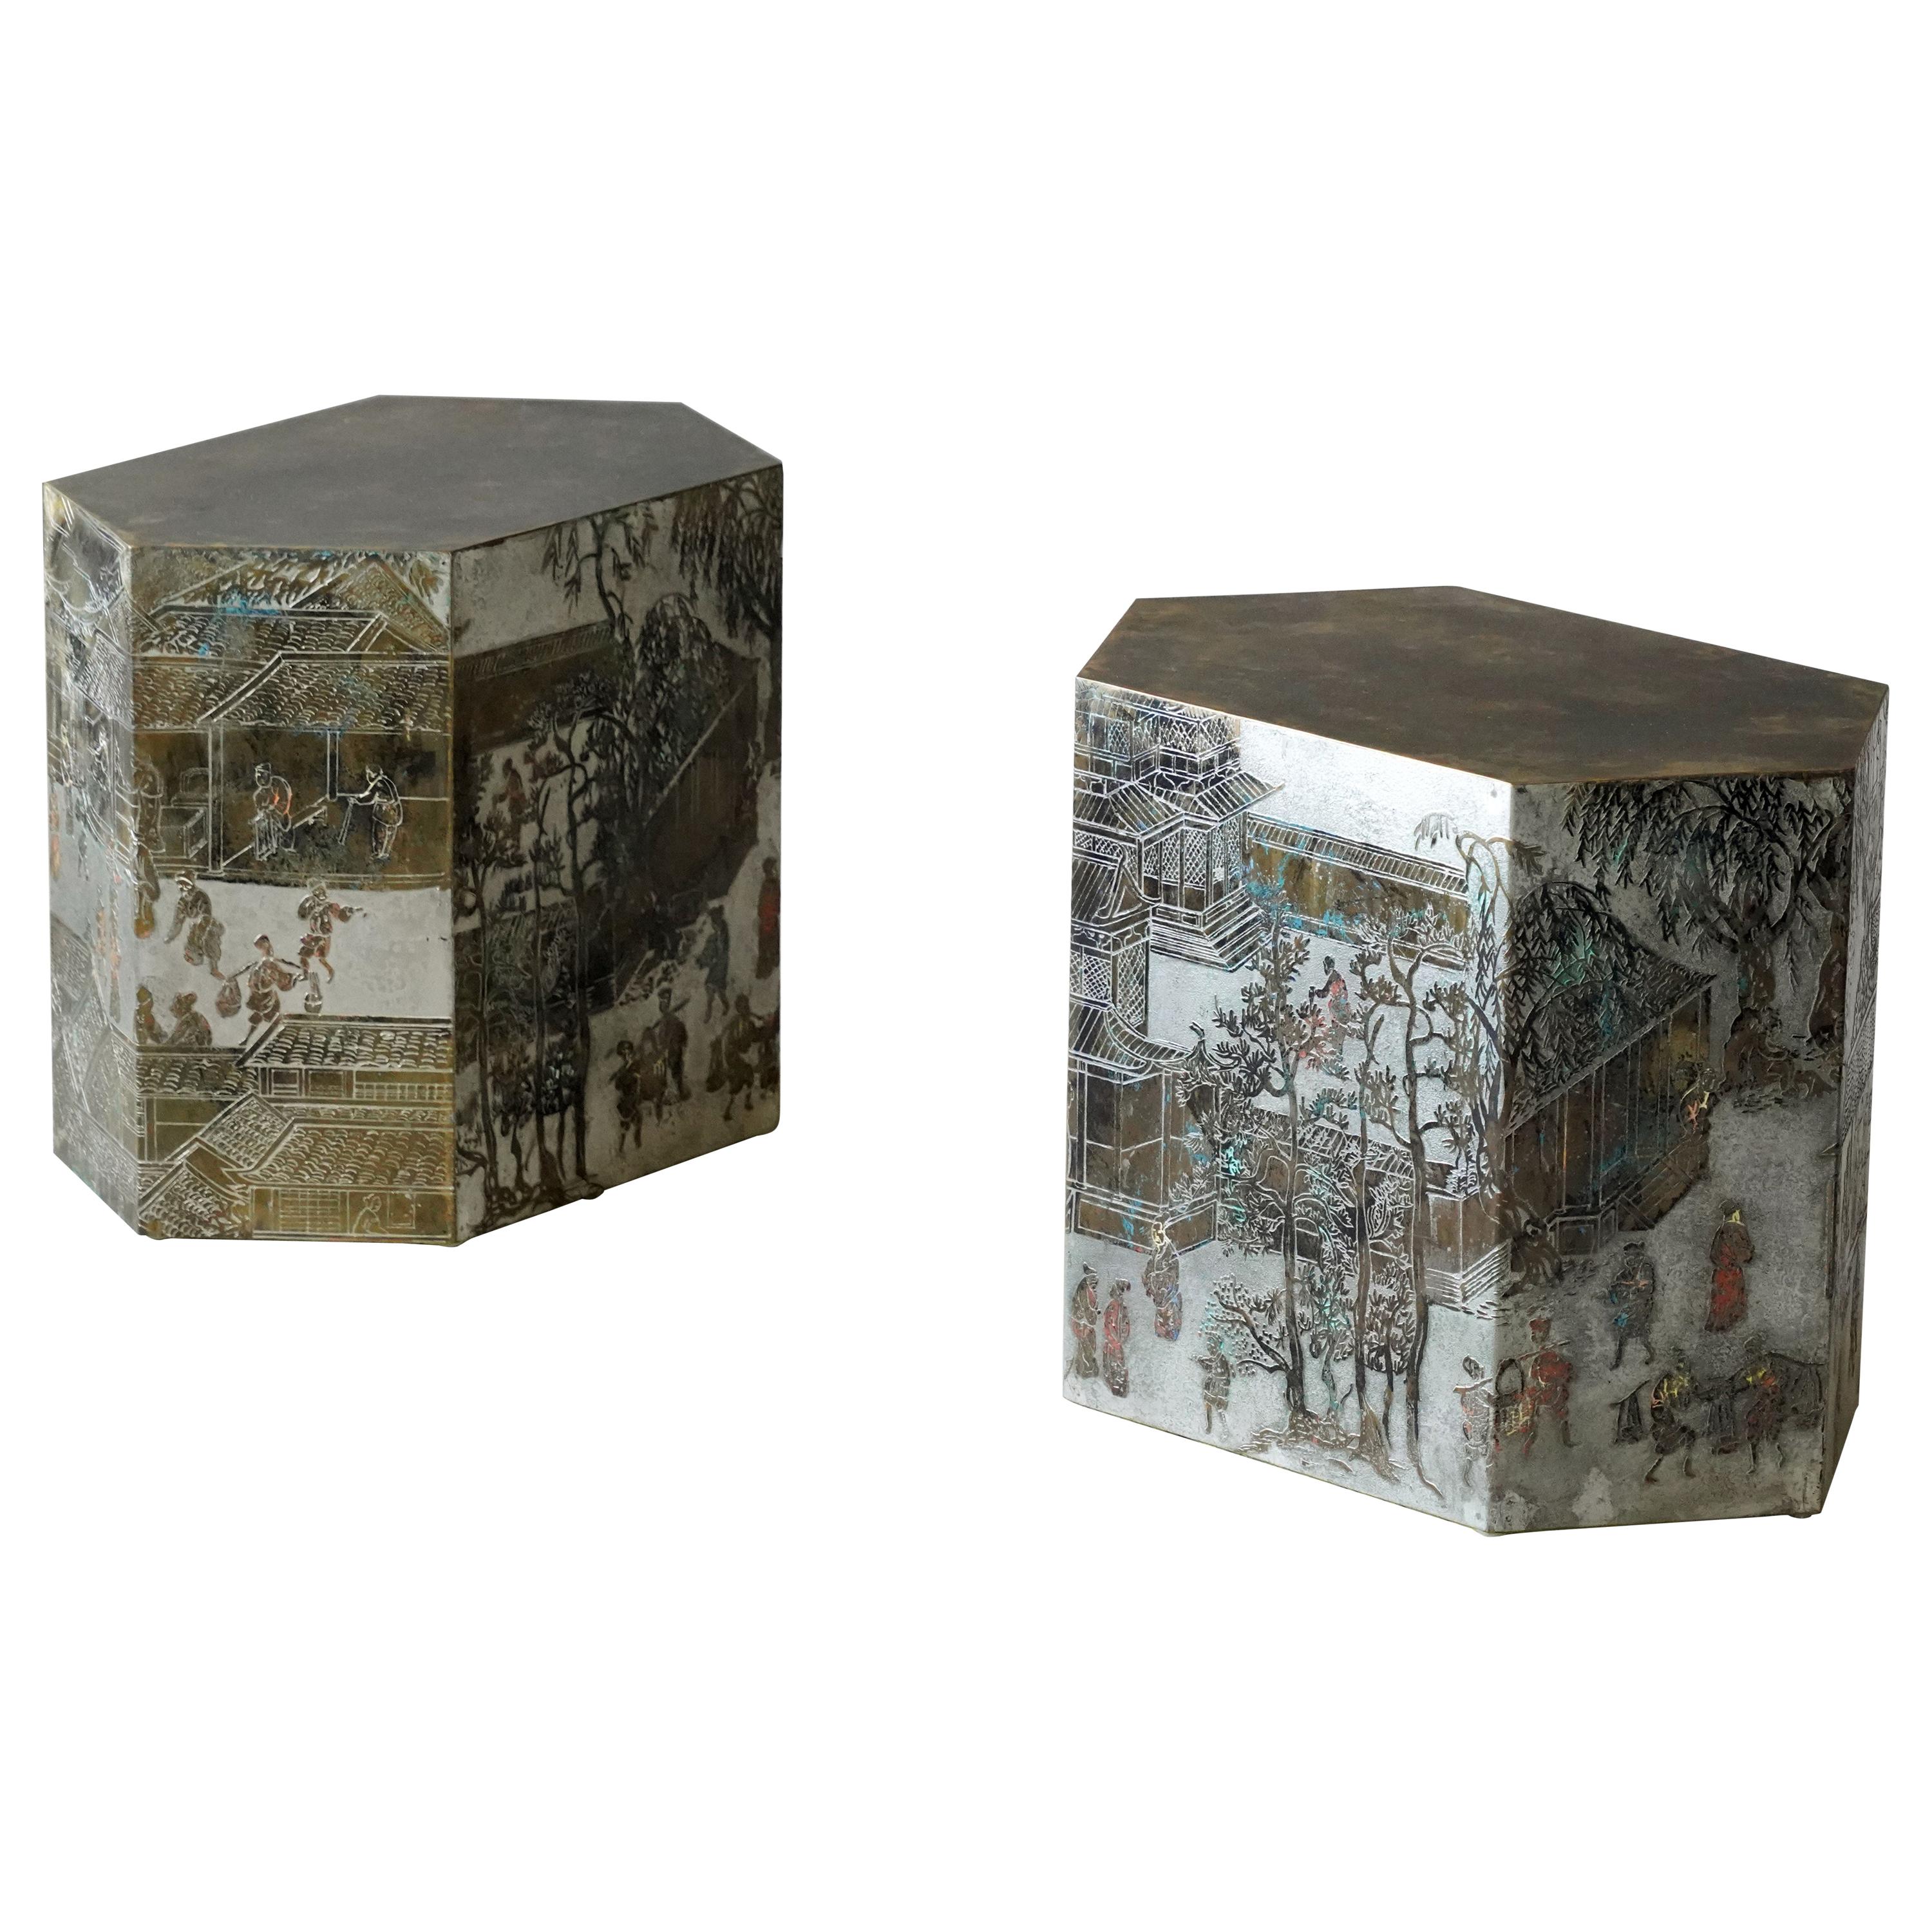 Philip & Kelvin Laverne, Rare Pair of "Chan" Side Tables, Brass, Pewter, 1965